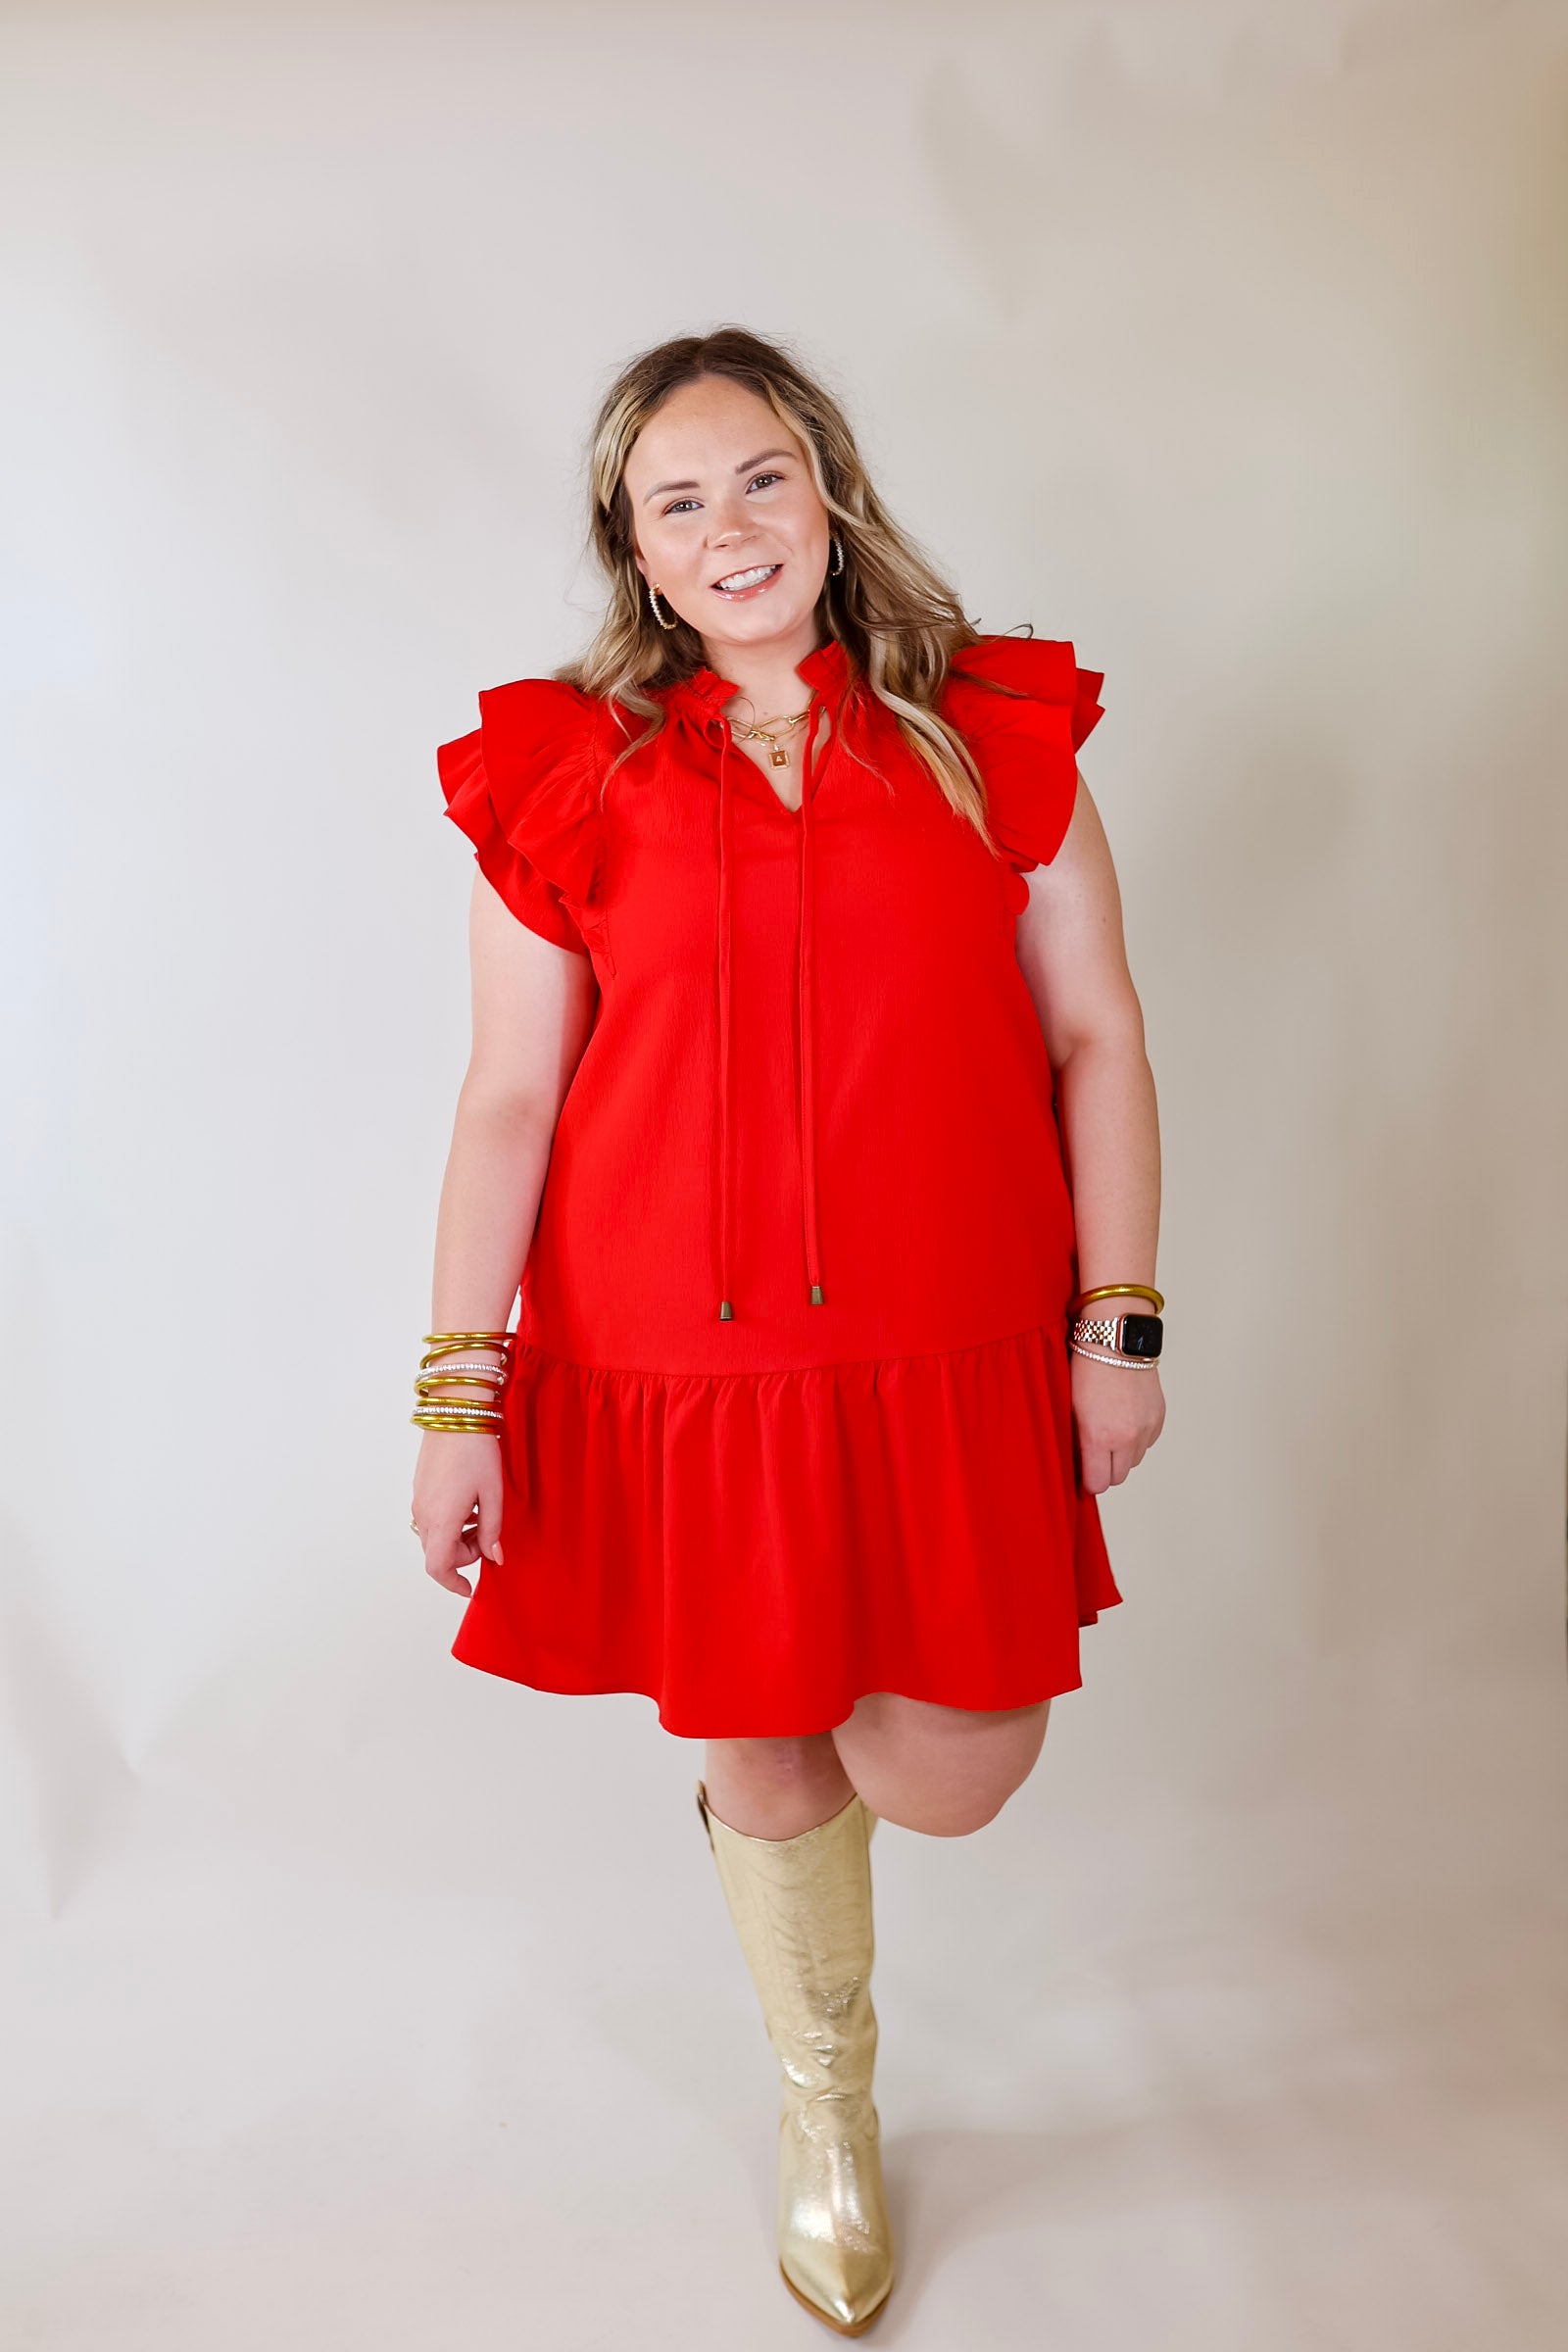 Powerful Love Ruffle Cap Sleeve Dress with Keyhole and Tie Neckline in Red - Giddy Up Glamour Boutique